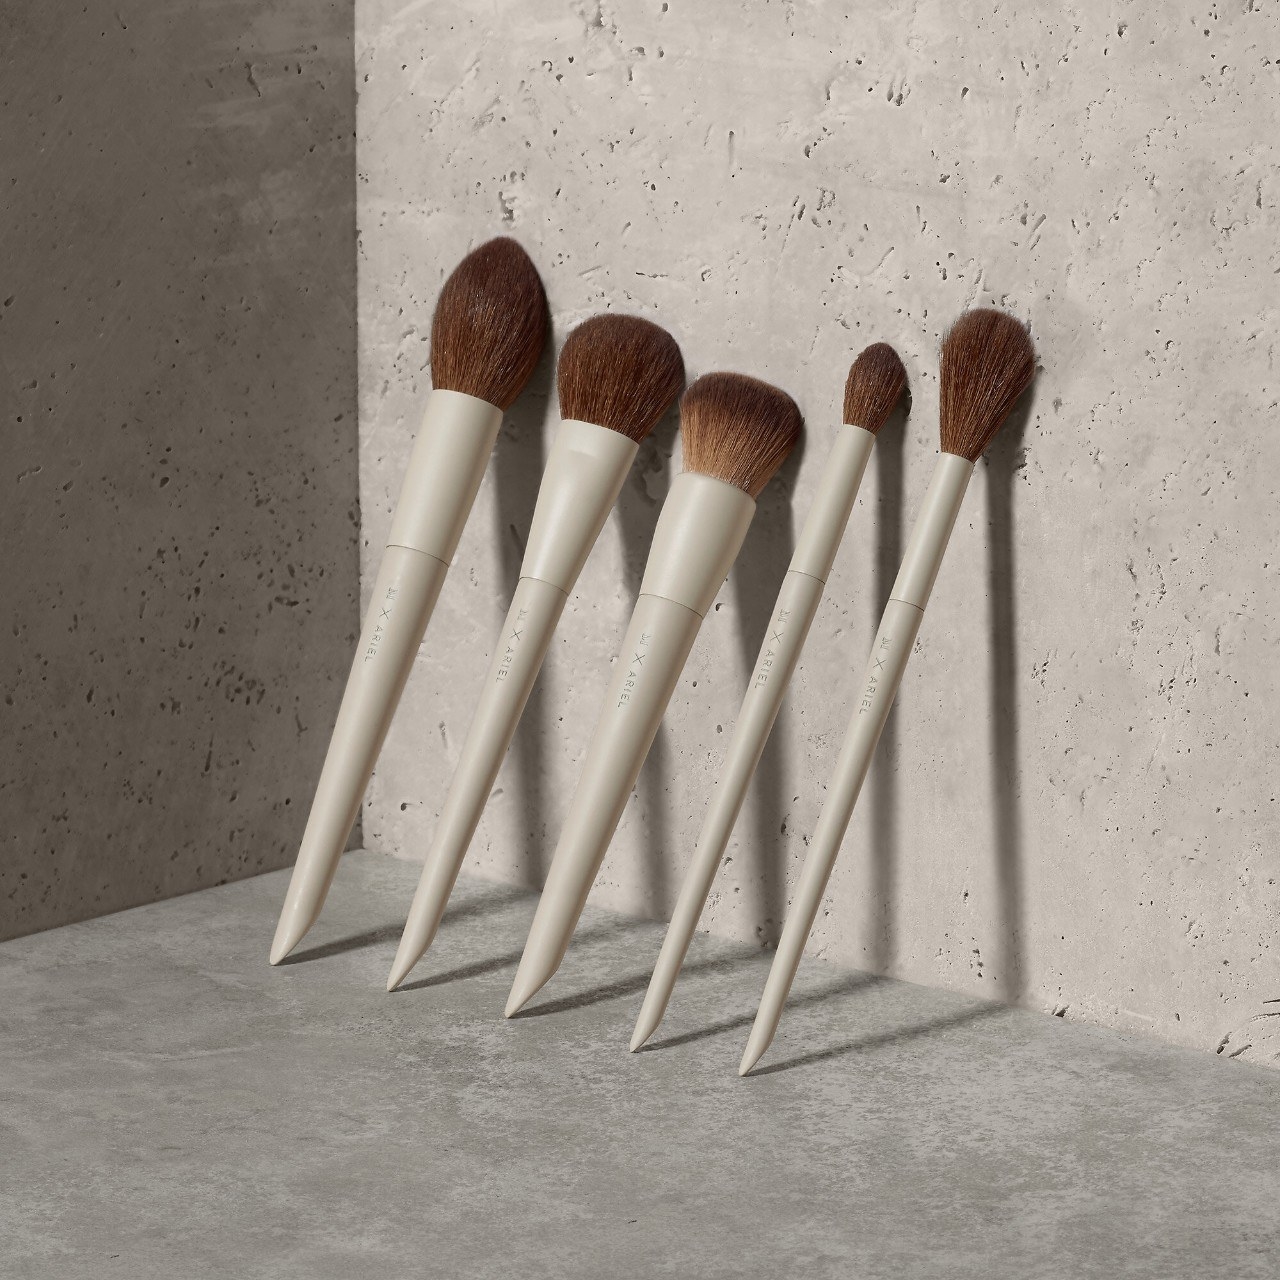 the five piece set of stylish brushes leaning against a concrete wall